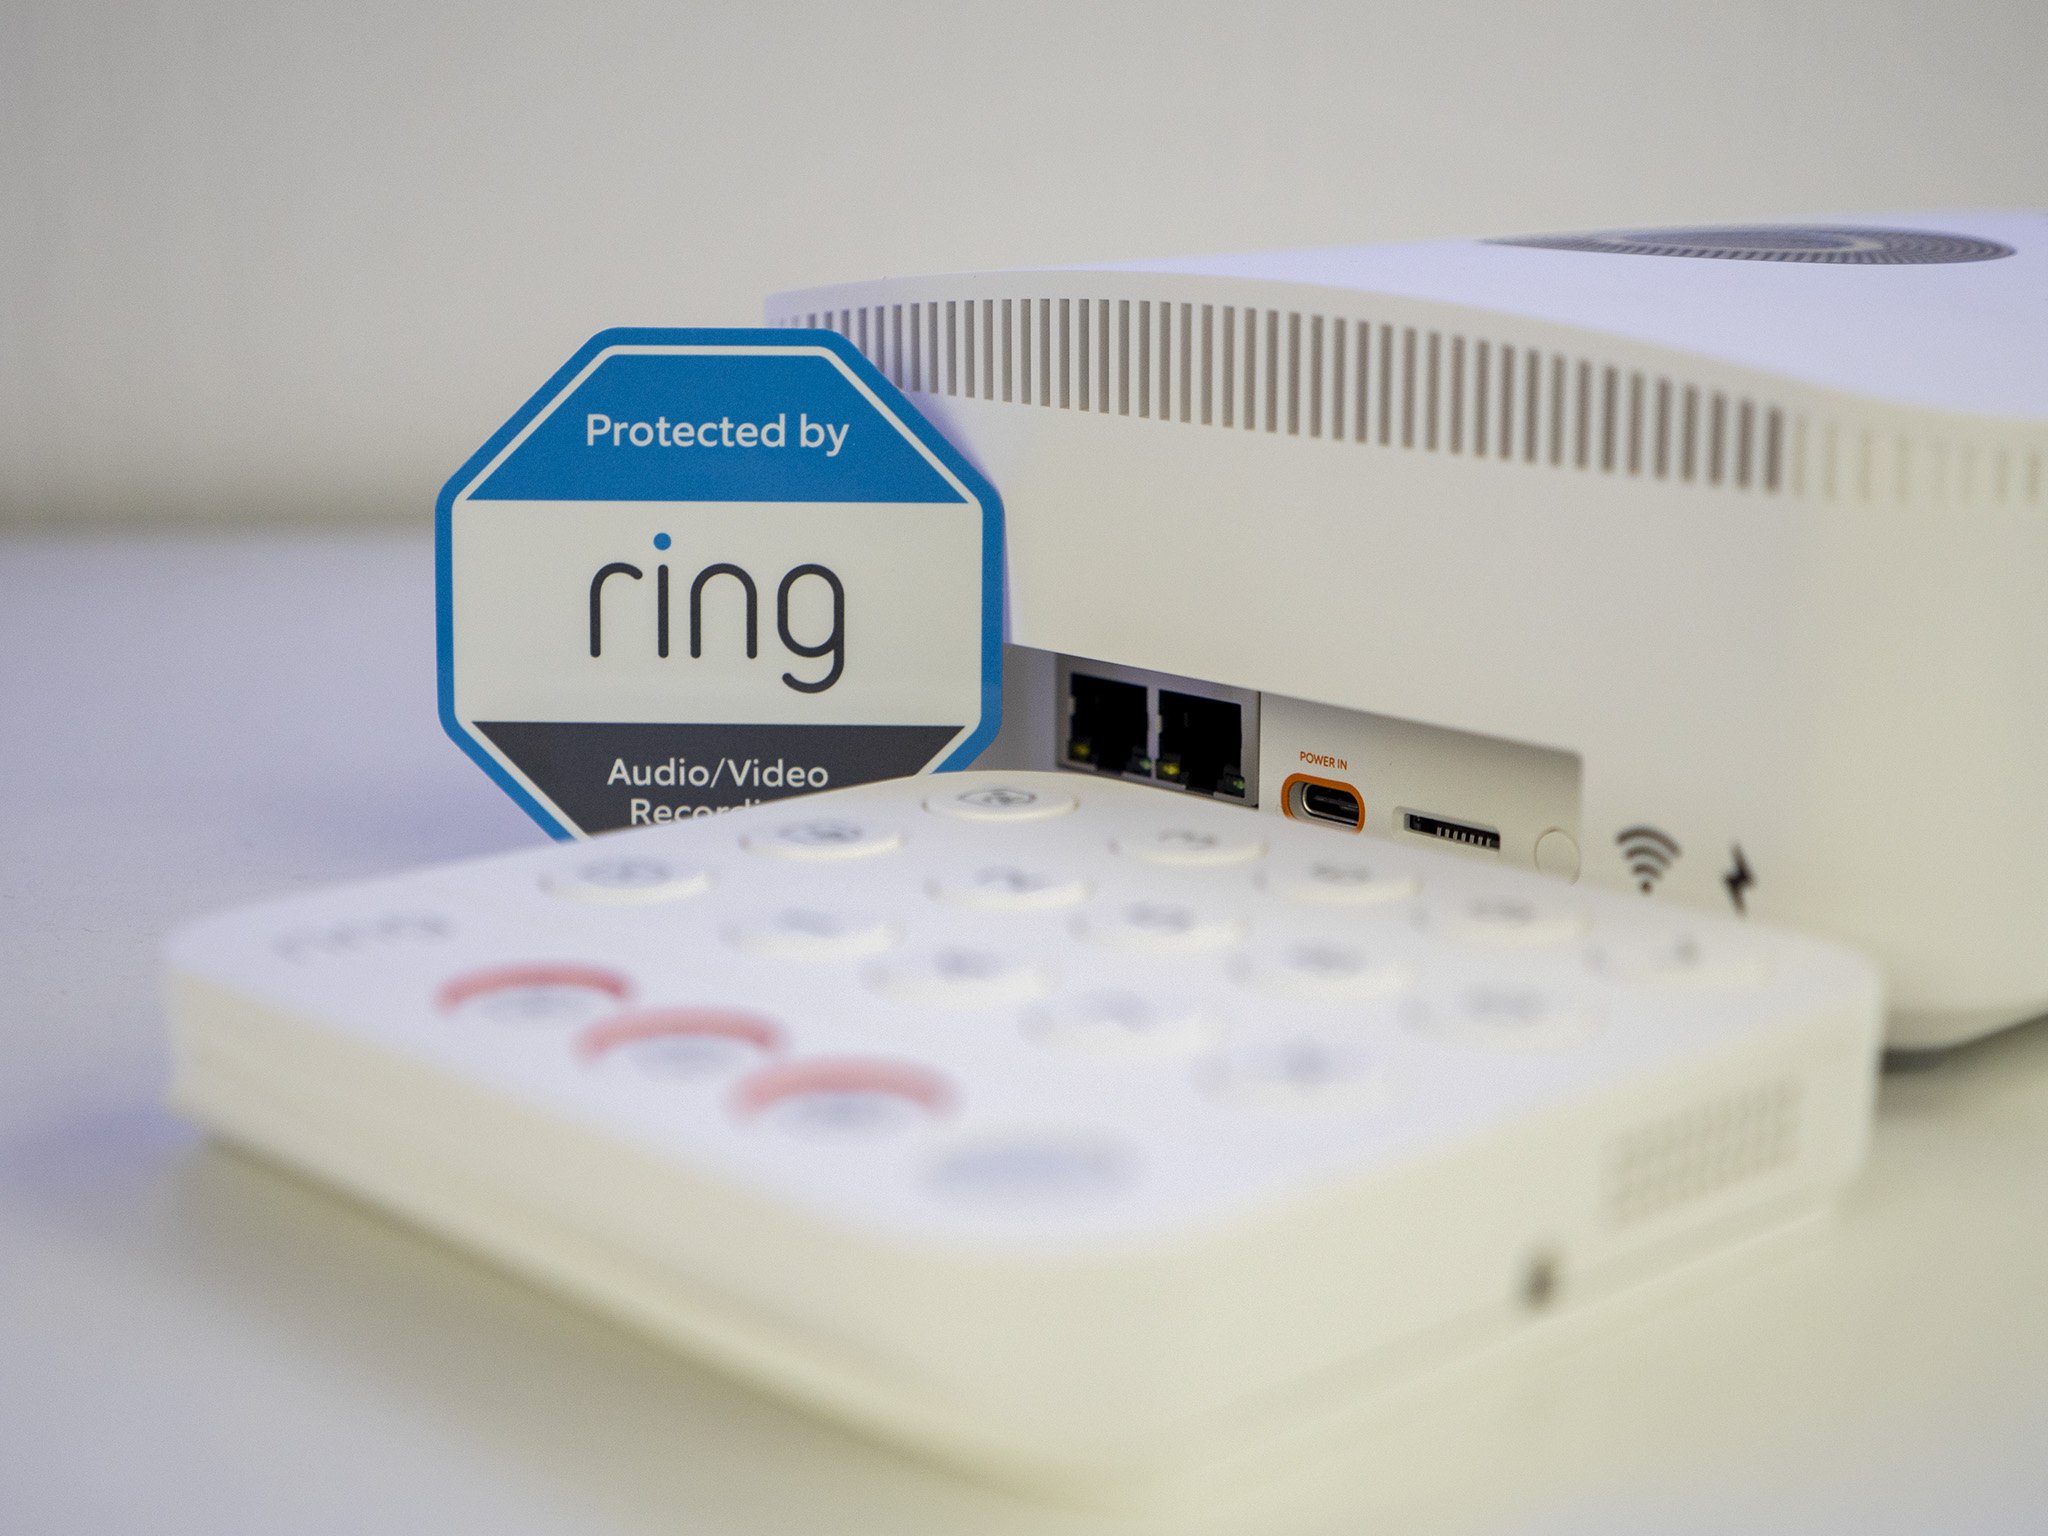 Ring Alarm Pro review: The best DIY home security system gets better